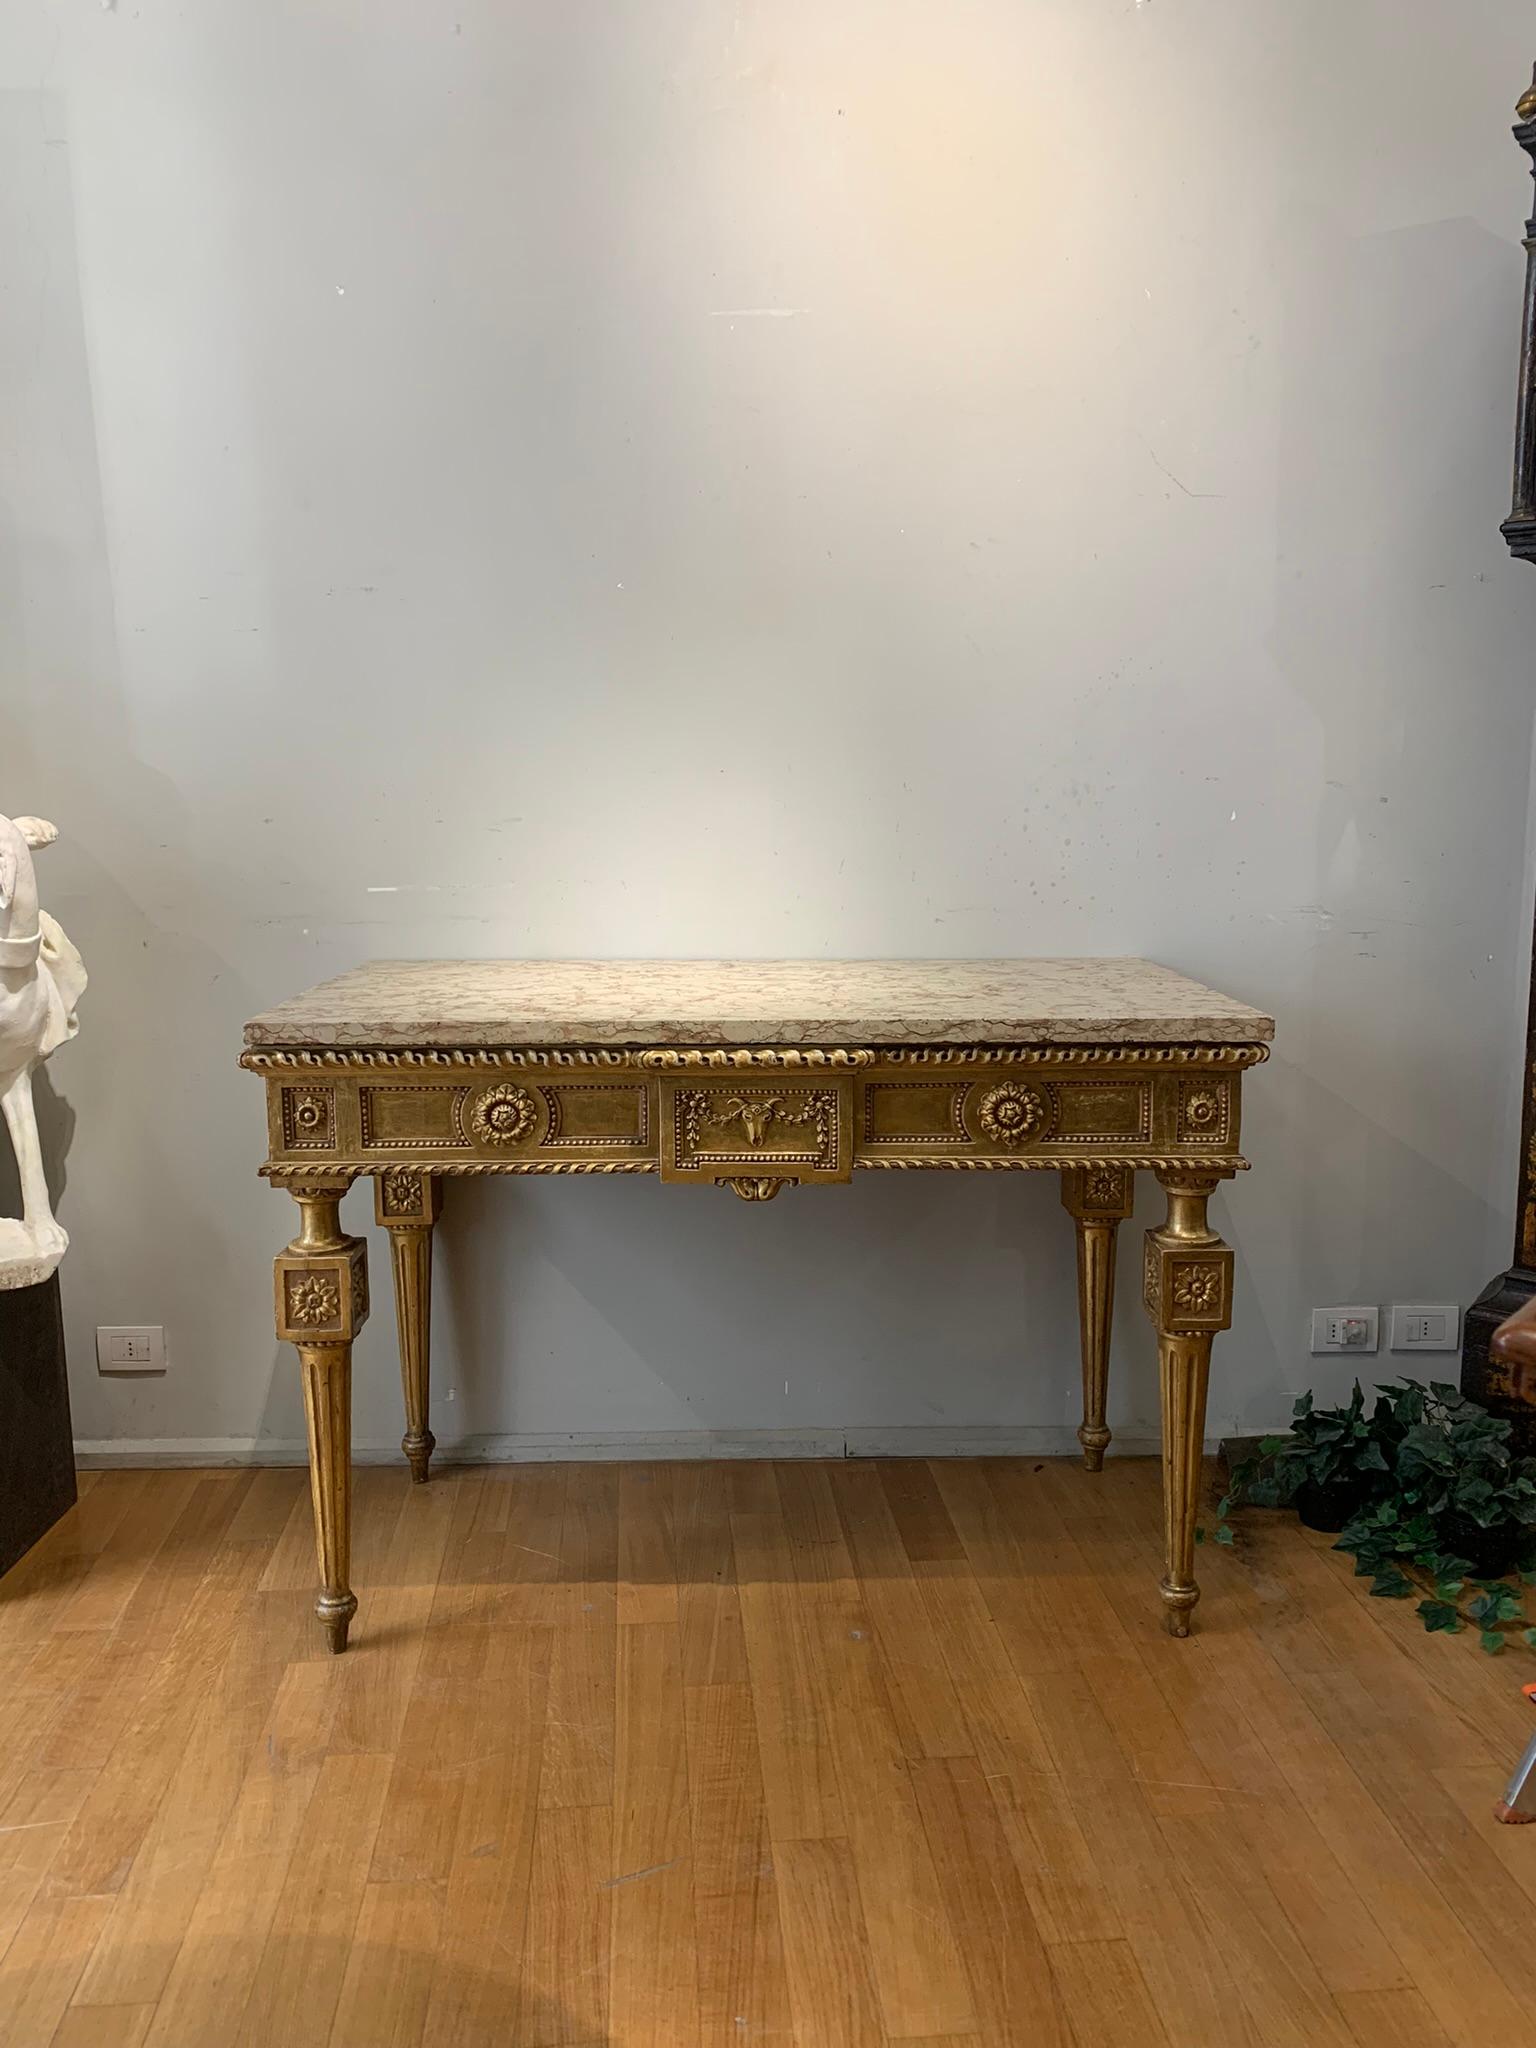 Superb console in carved wood and gilded with pure gold leaf. Straight band under the top supported by 4 truncated cone legs piled with a square before grafting. The refined and well-proportioned carvings are beautiful.
Top in light red Verona